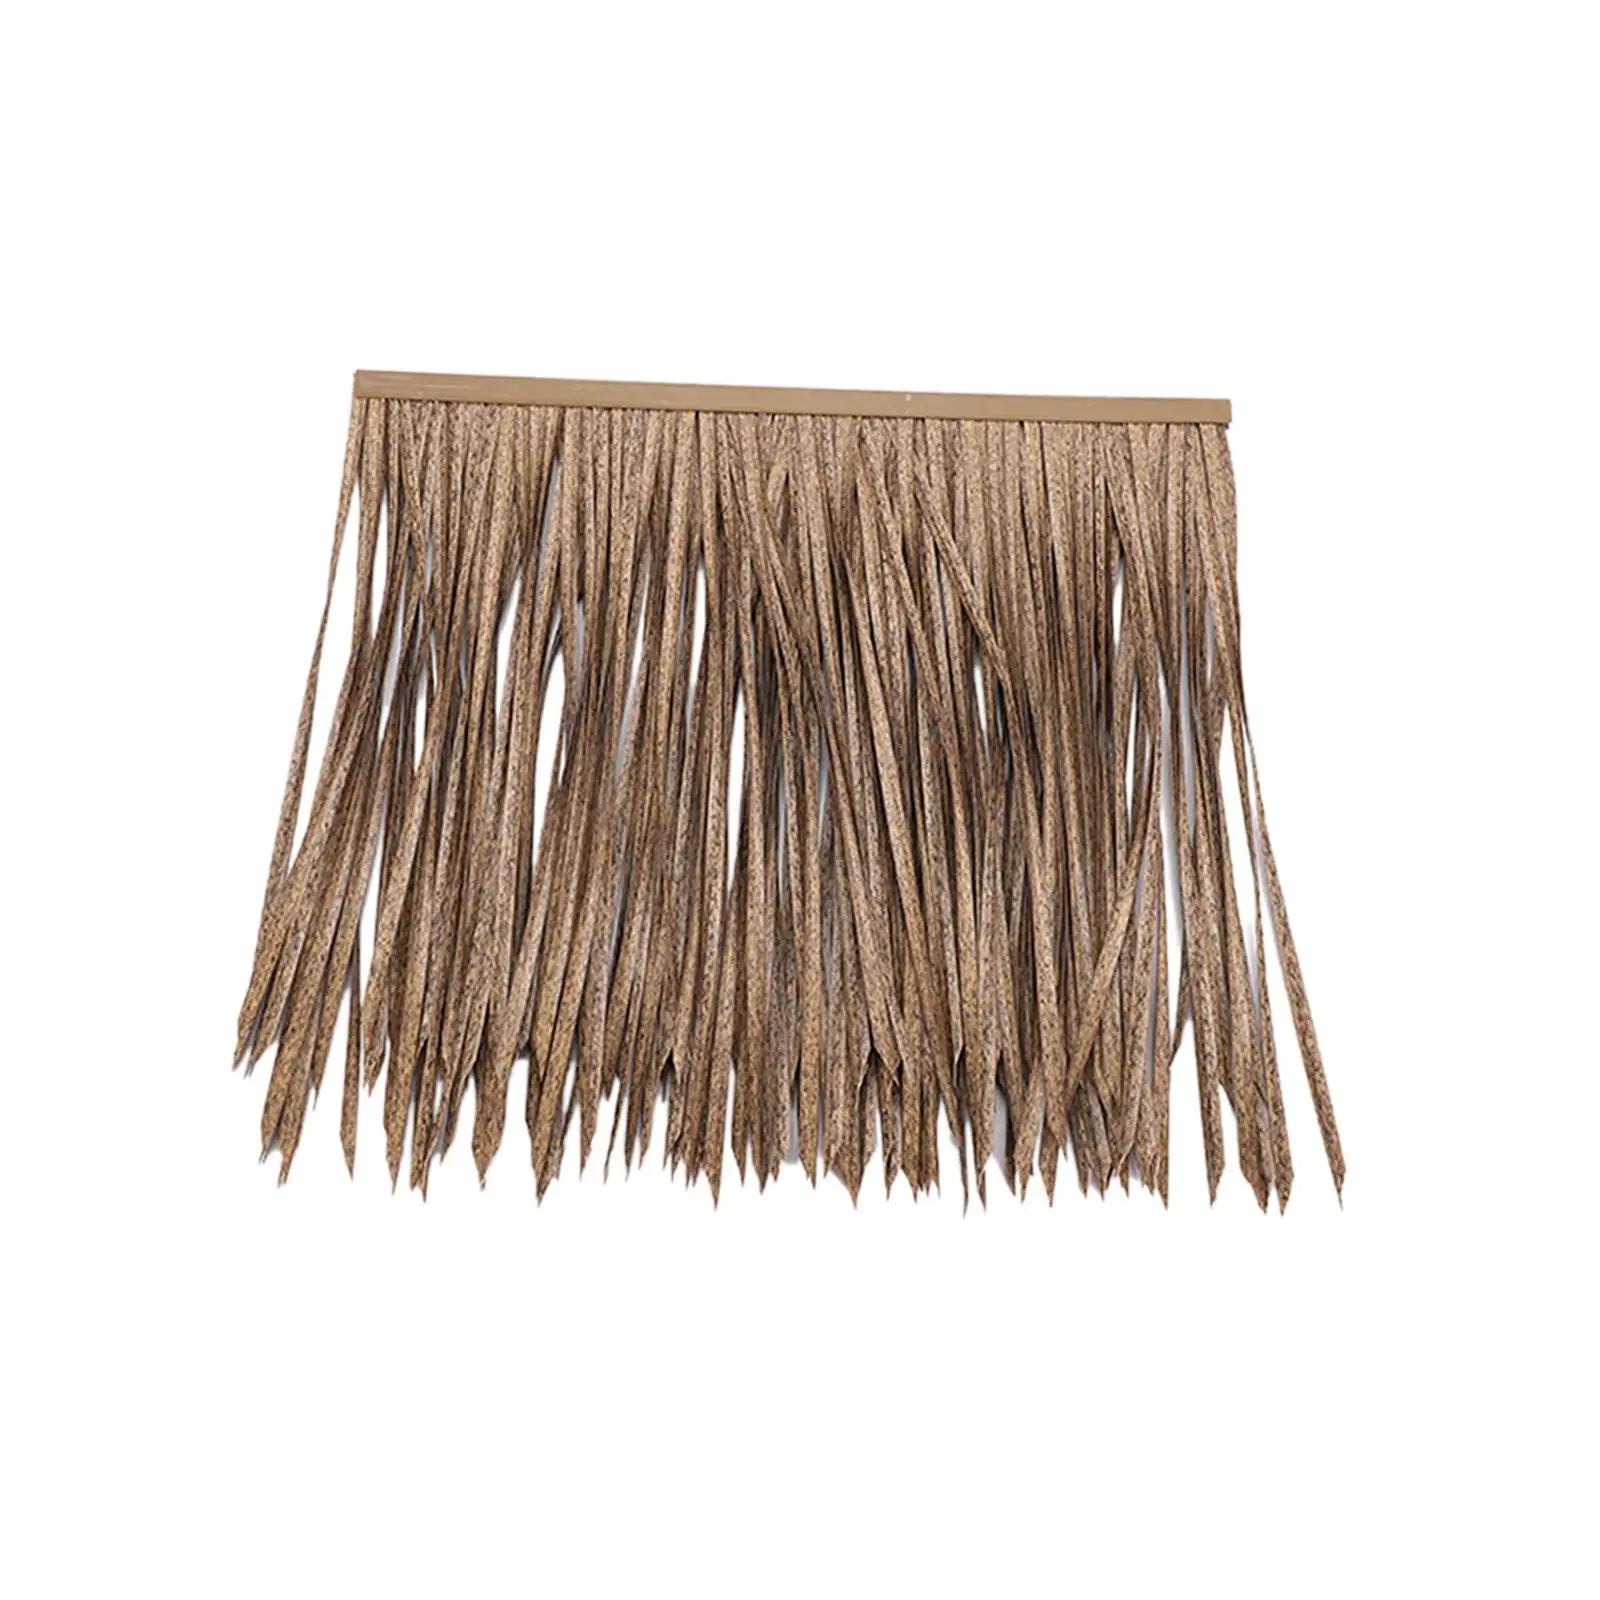 Simulated Thatch Roof DIY Multipurpose Decoration 19.69``x19.69`` Straw Roof Thatch for Seaside Patio Hut Villas Park Landscapes